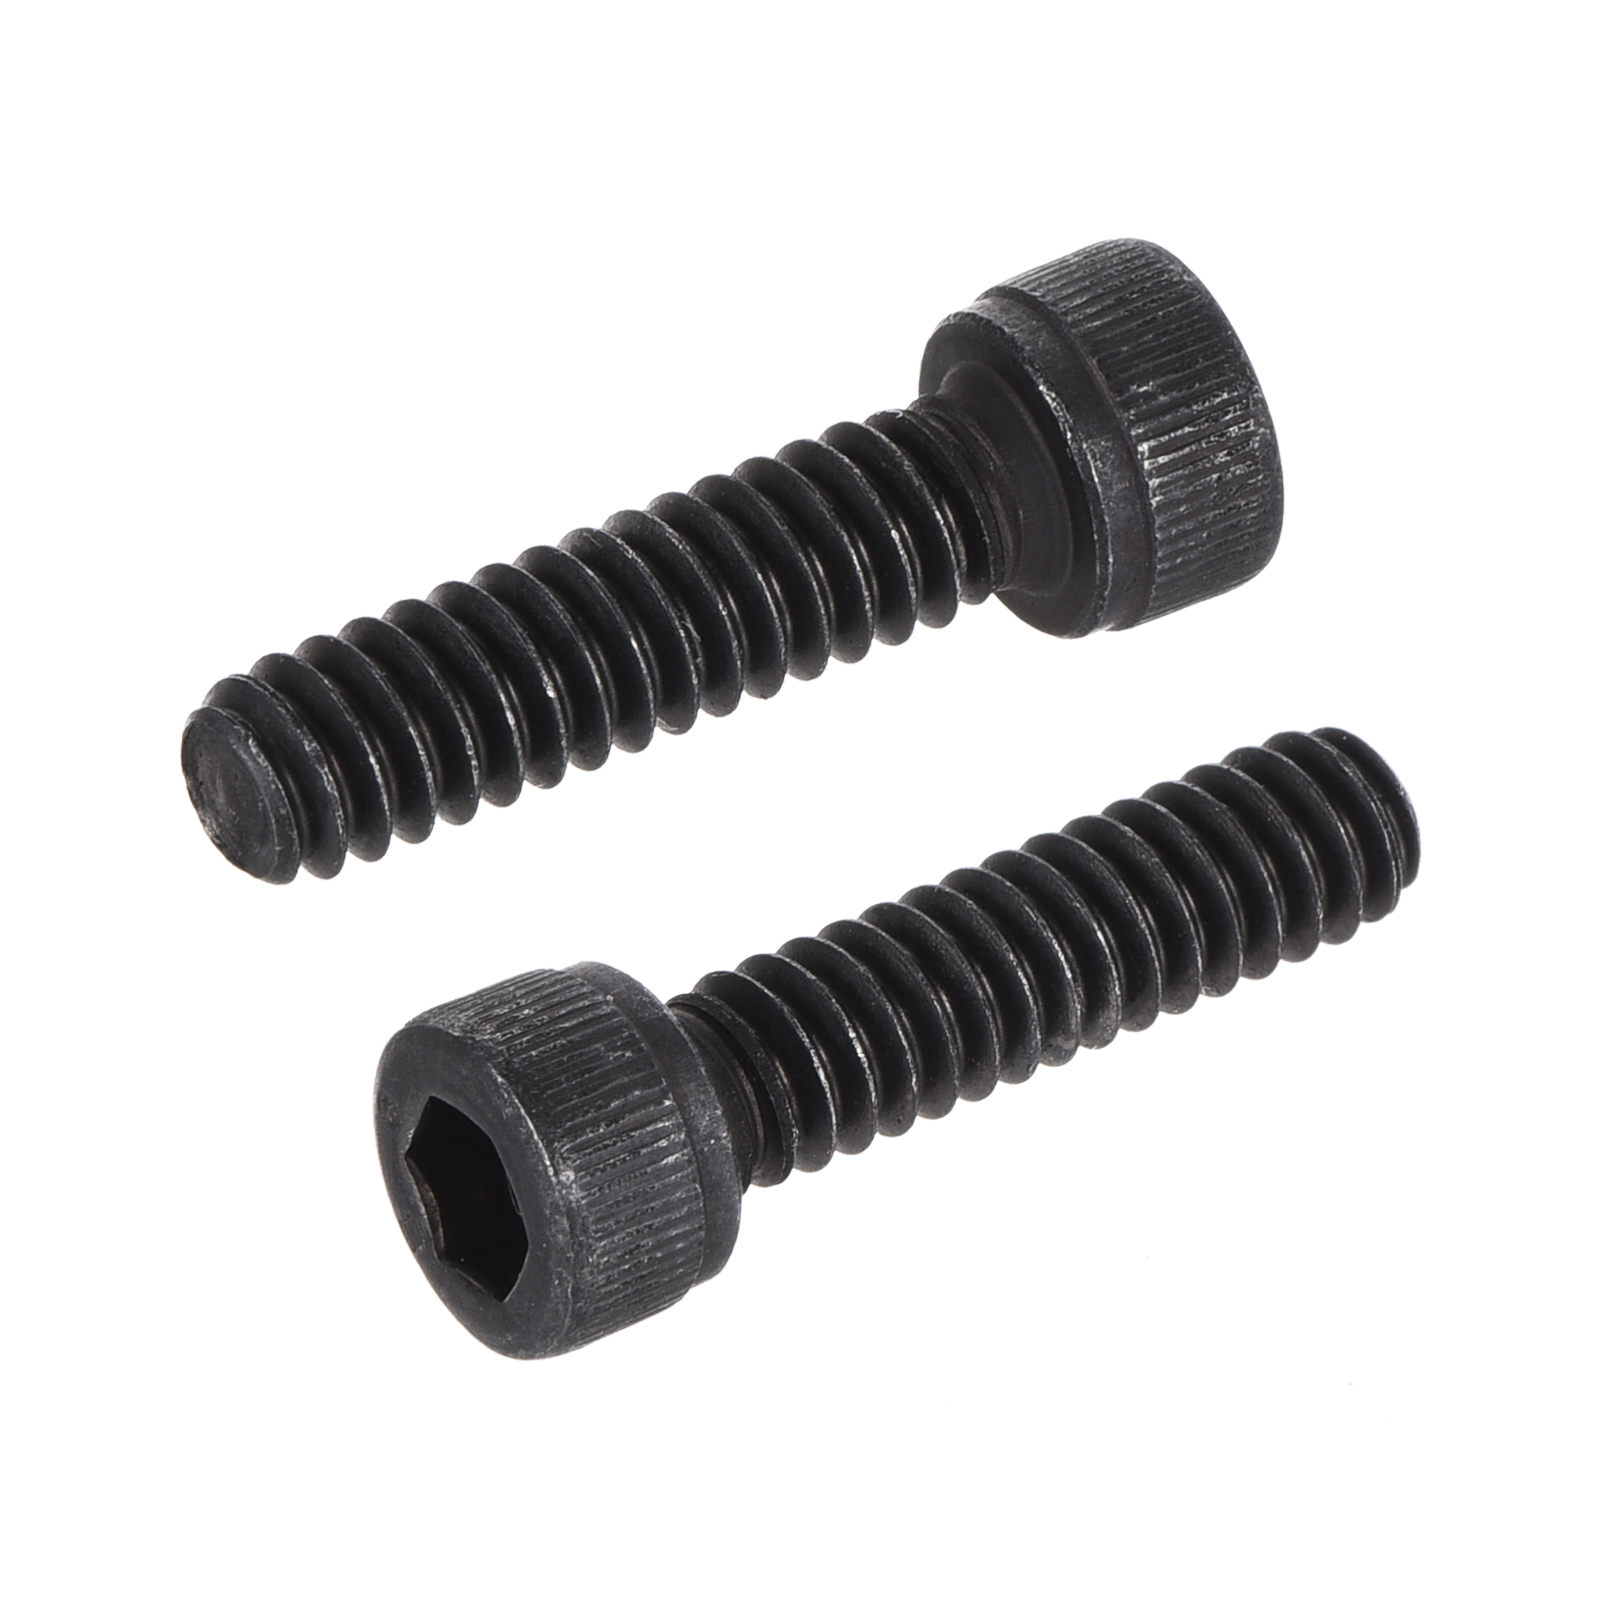 #10-24x3/4" Hex Socket Head Bolts 12.9 Alloy Steel 25 Pack - image 1 of 5